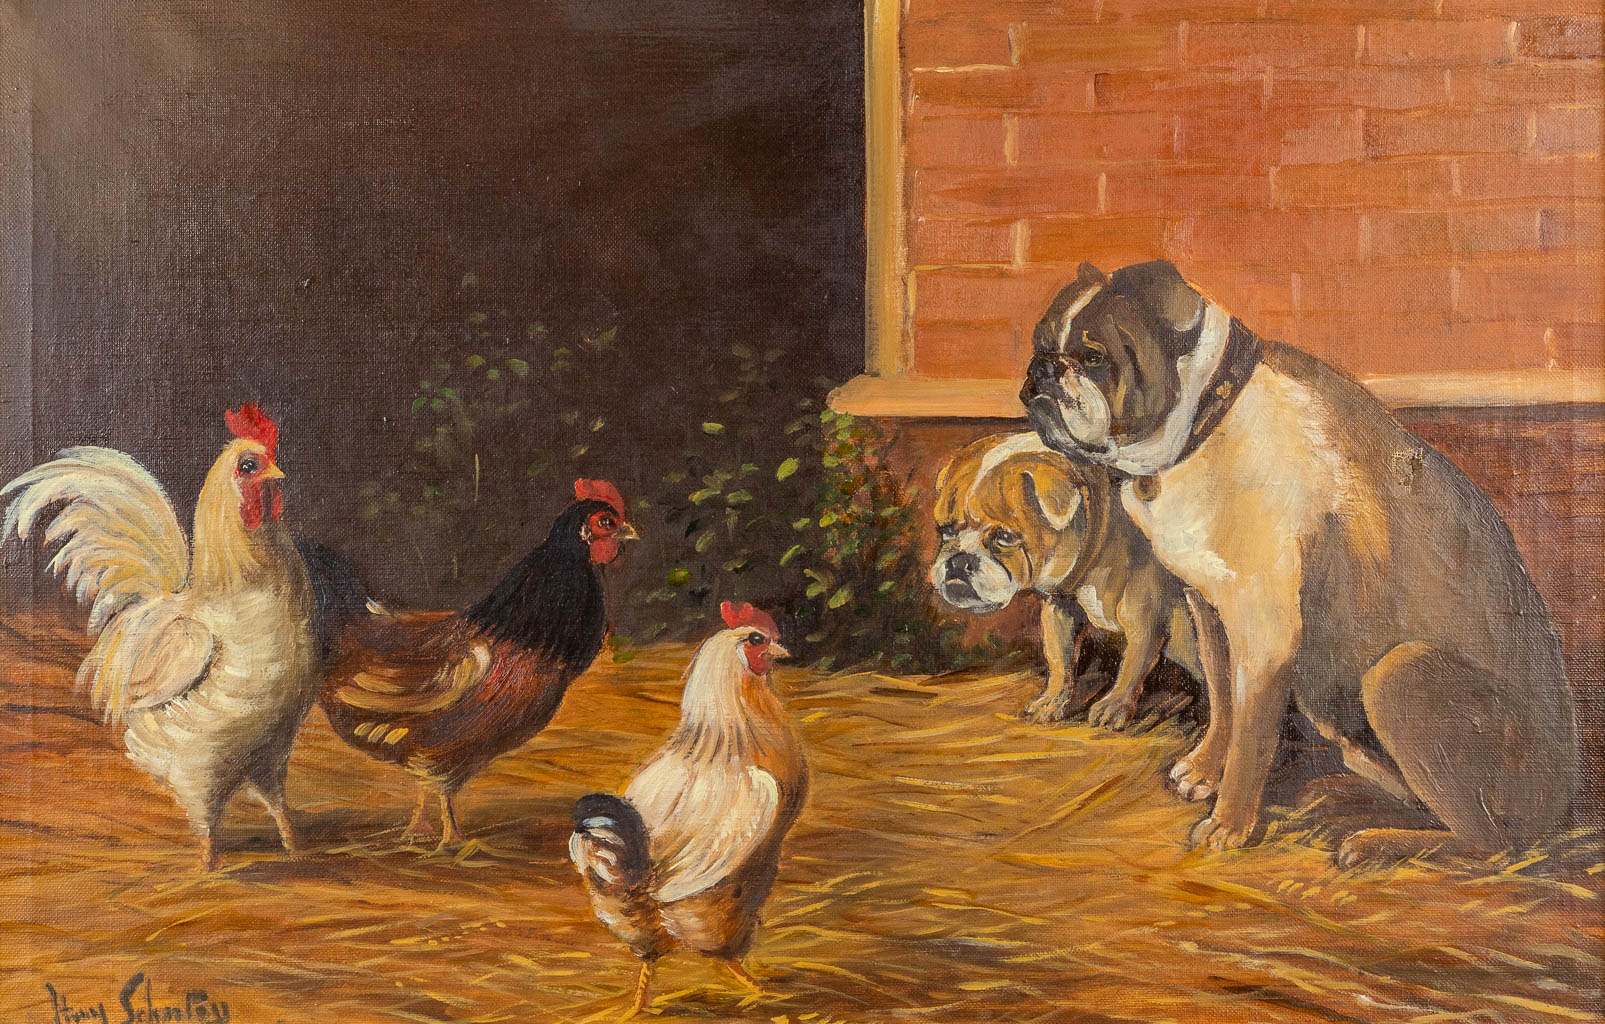 Paul SCHOUTEN (1860-1922) 'Chicken and dogs' a painting, oil on canvas. (W:54 x H:36 cm)